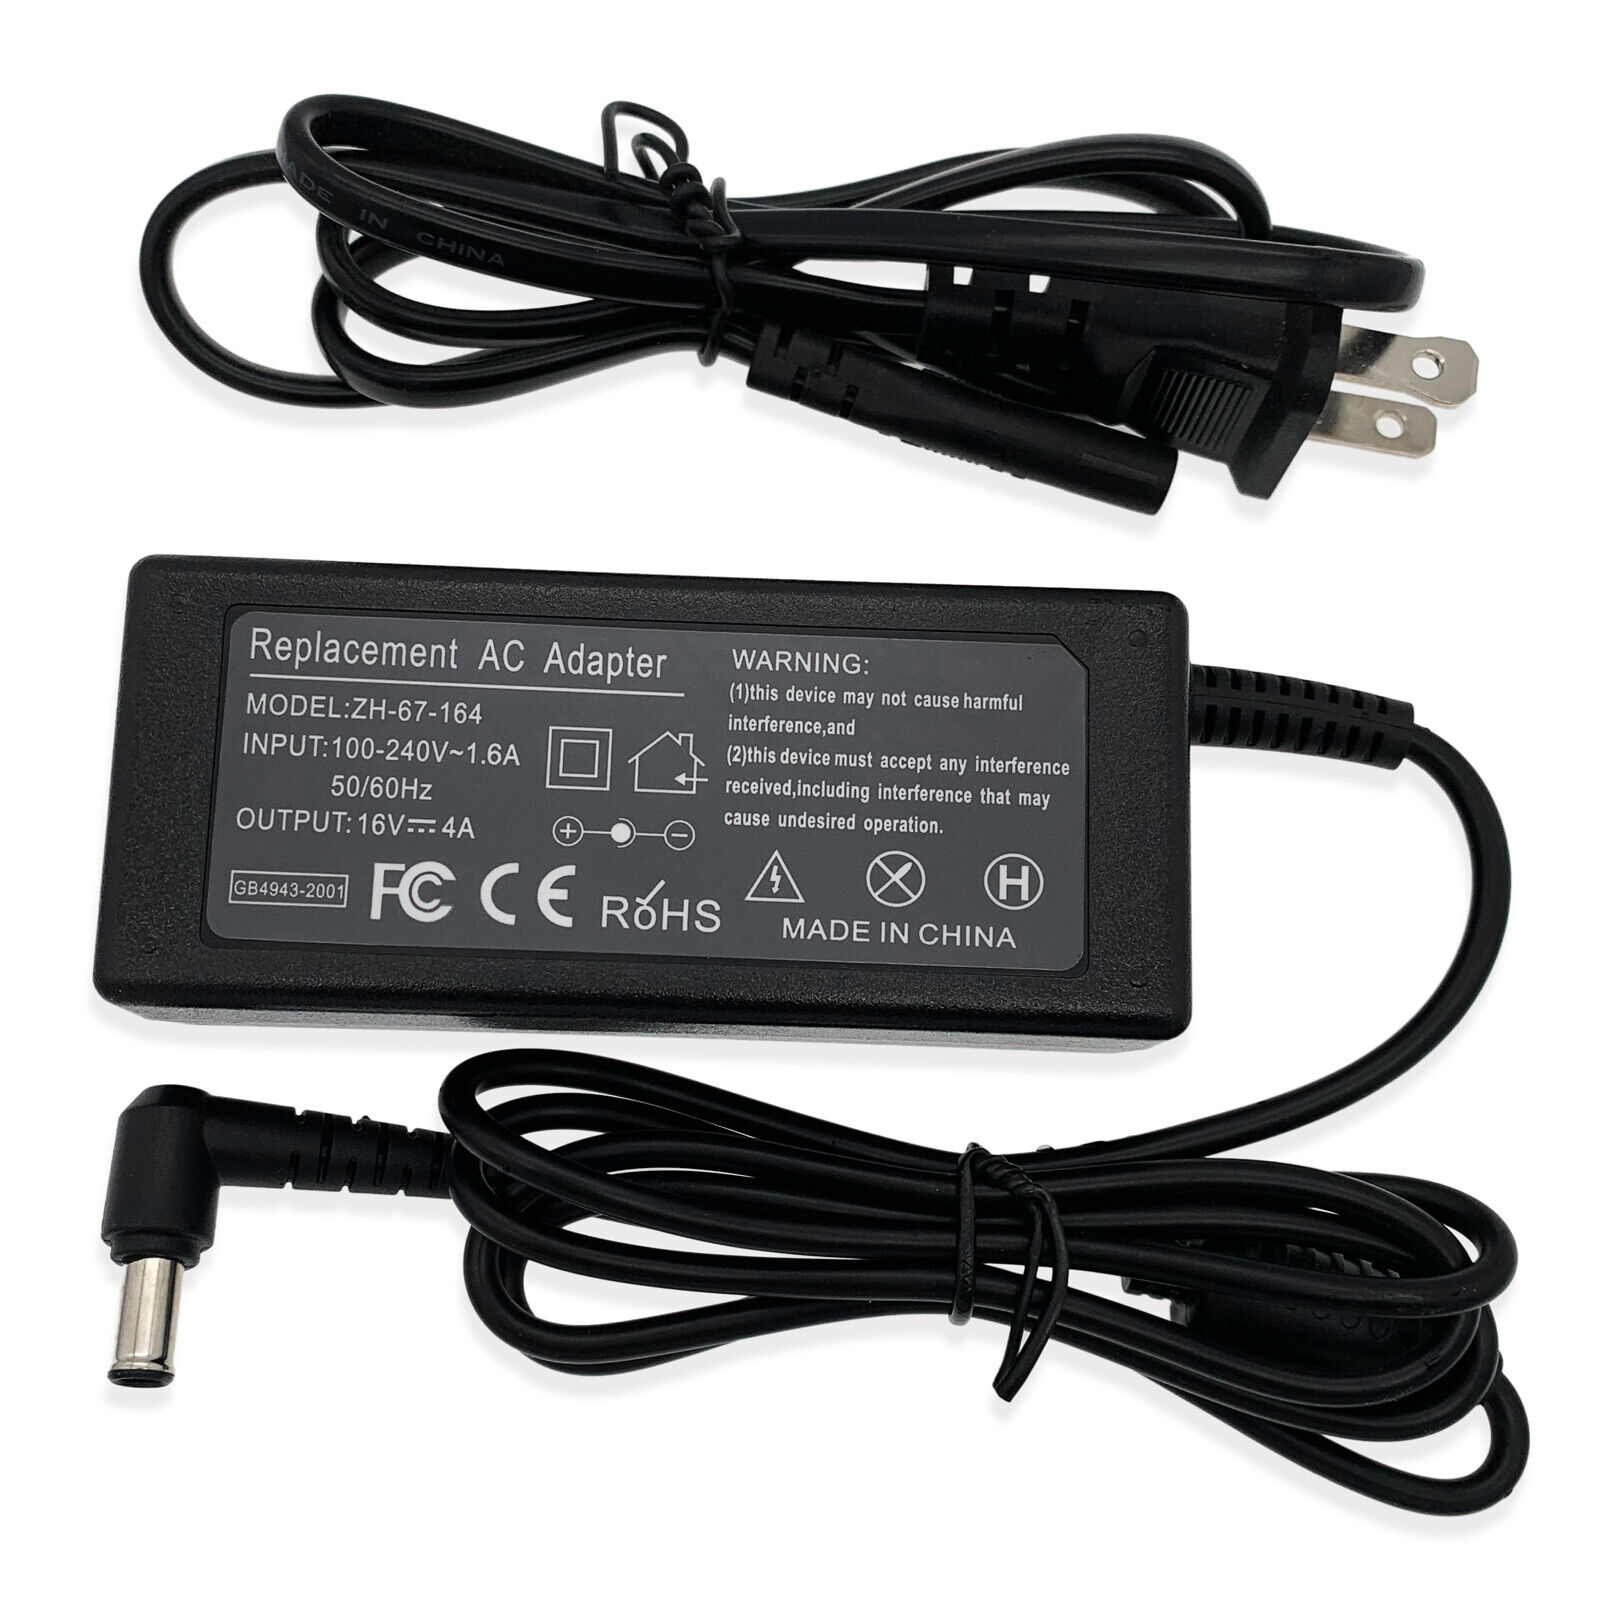 16V 64W AC Power Adapter Charger for Sony Vaio PCG-181 PCG-500 PCG-505 PCG-V505